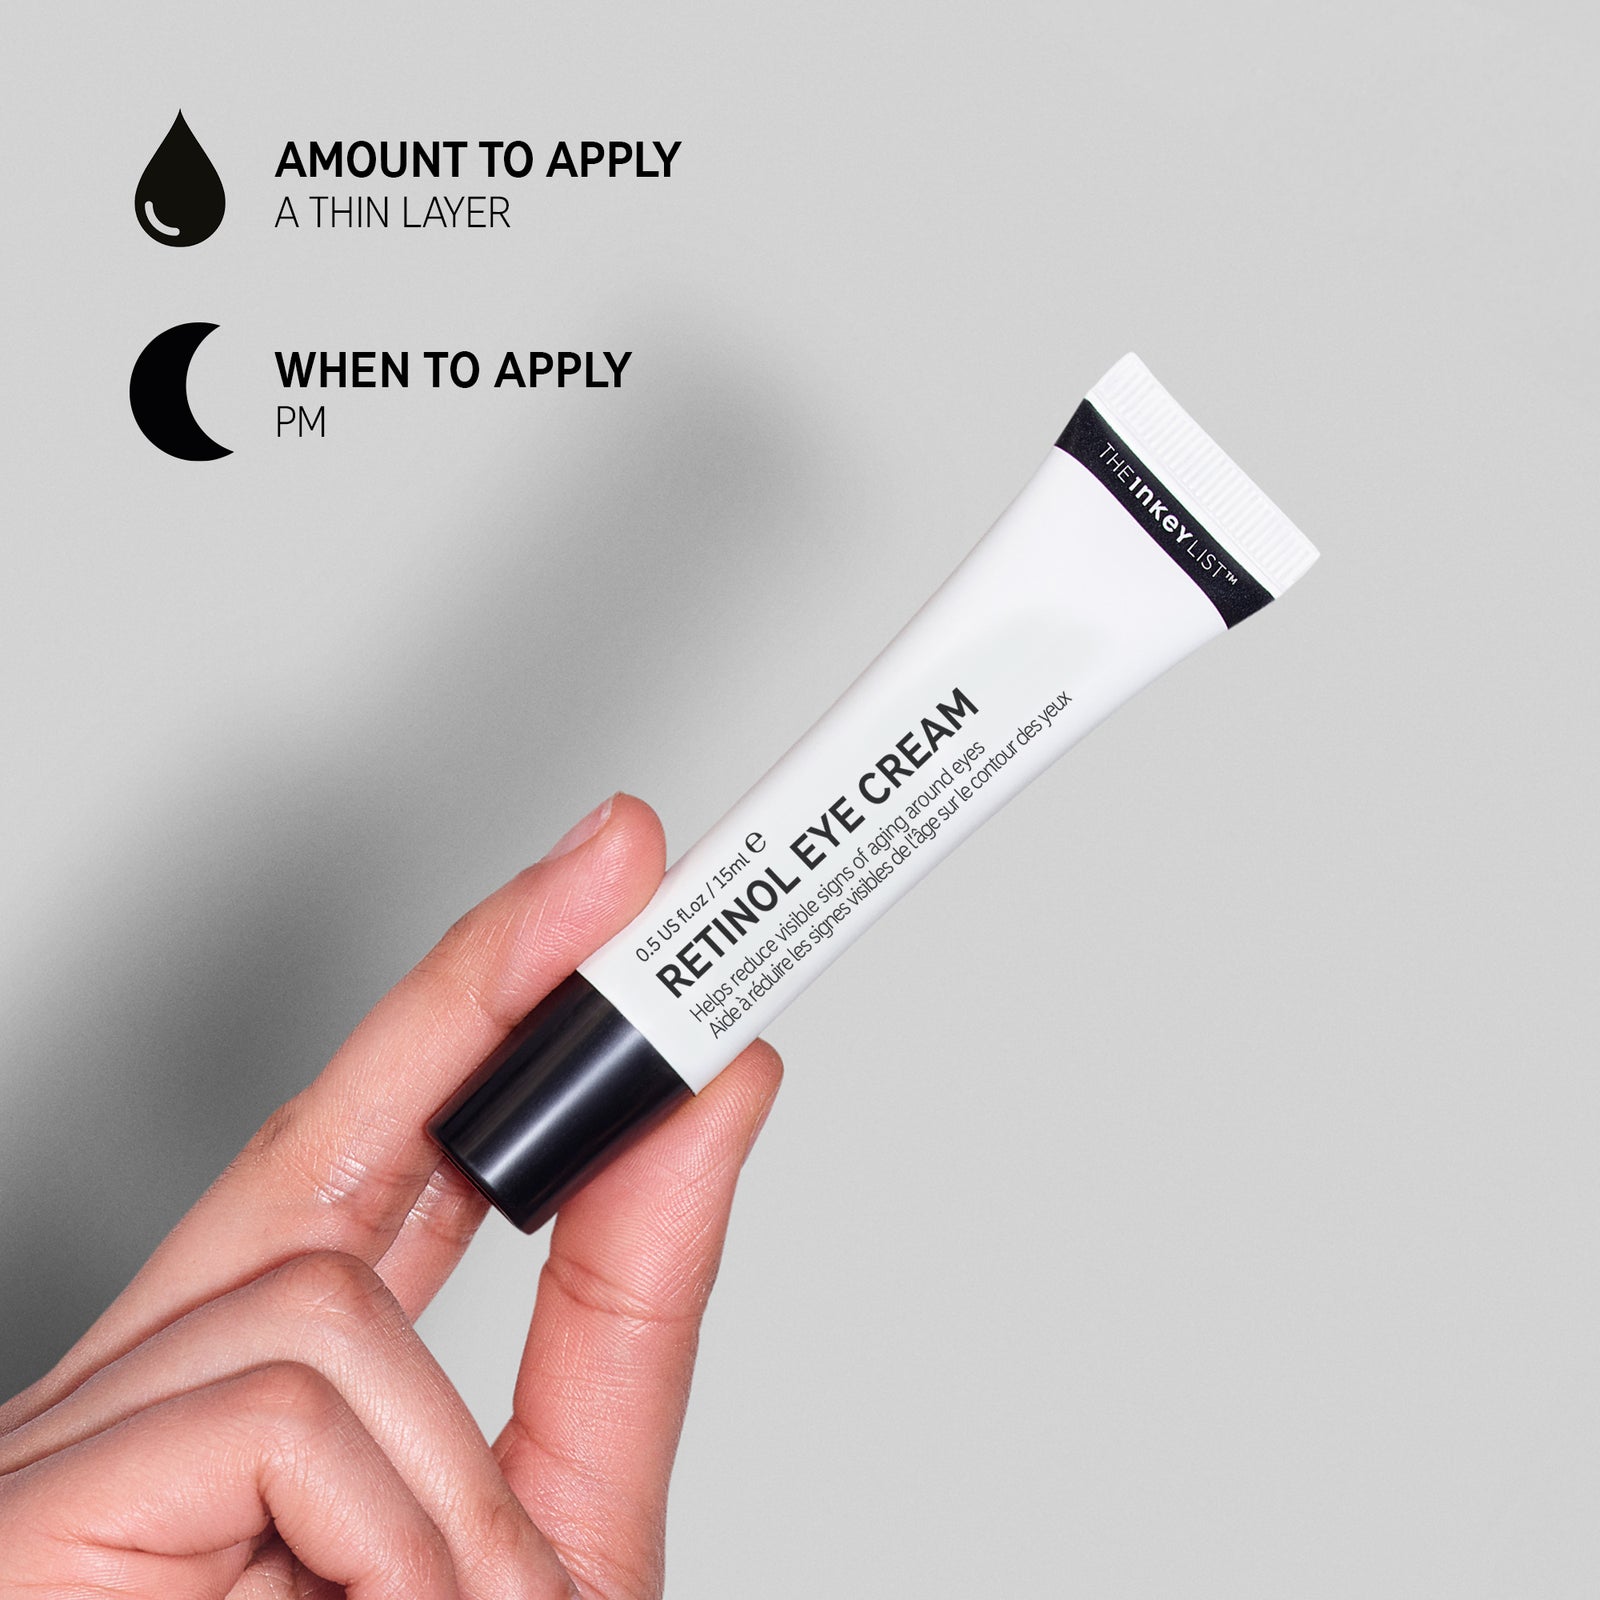 Retinol Eye Cream annotated with how and when to use it with text that reads 'Amount to apply (a thin layer)' and 'When to apply (PM)'